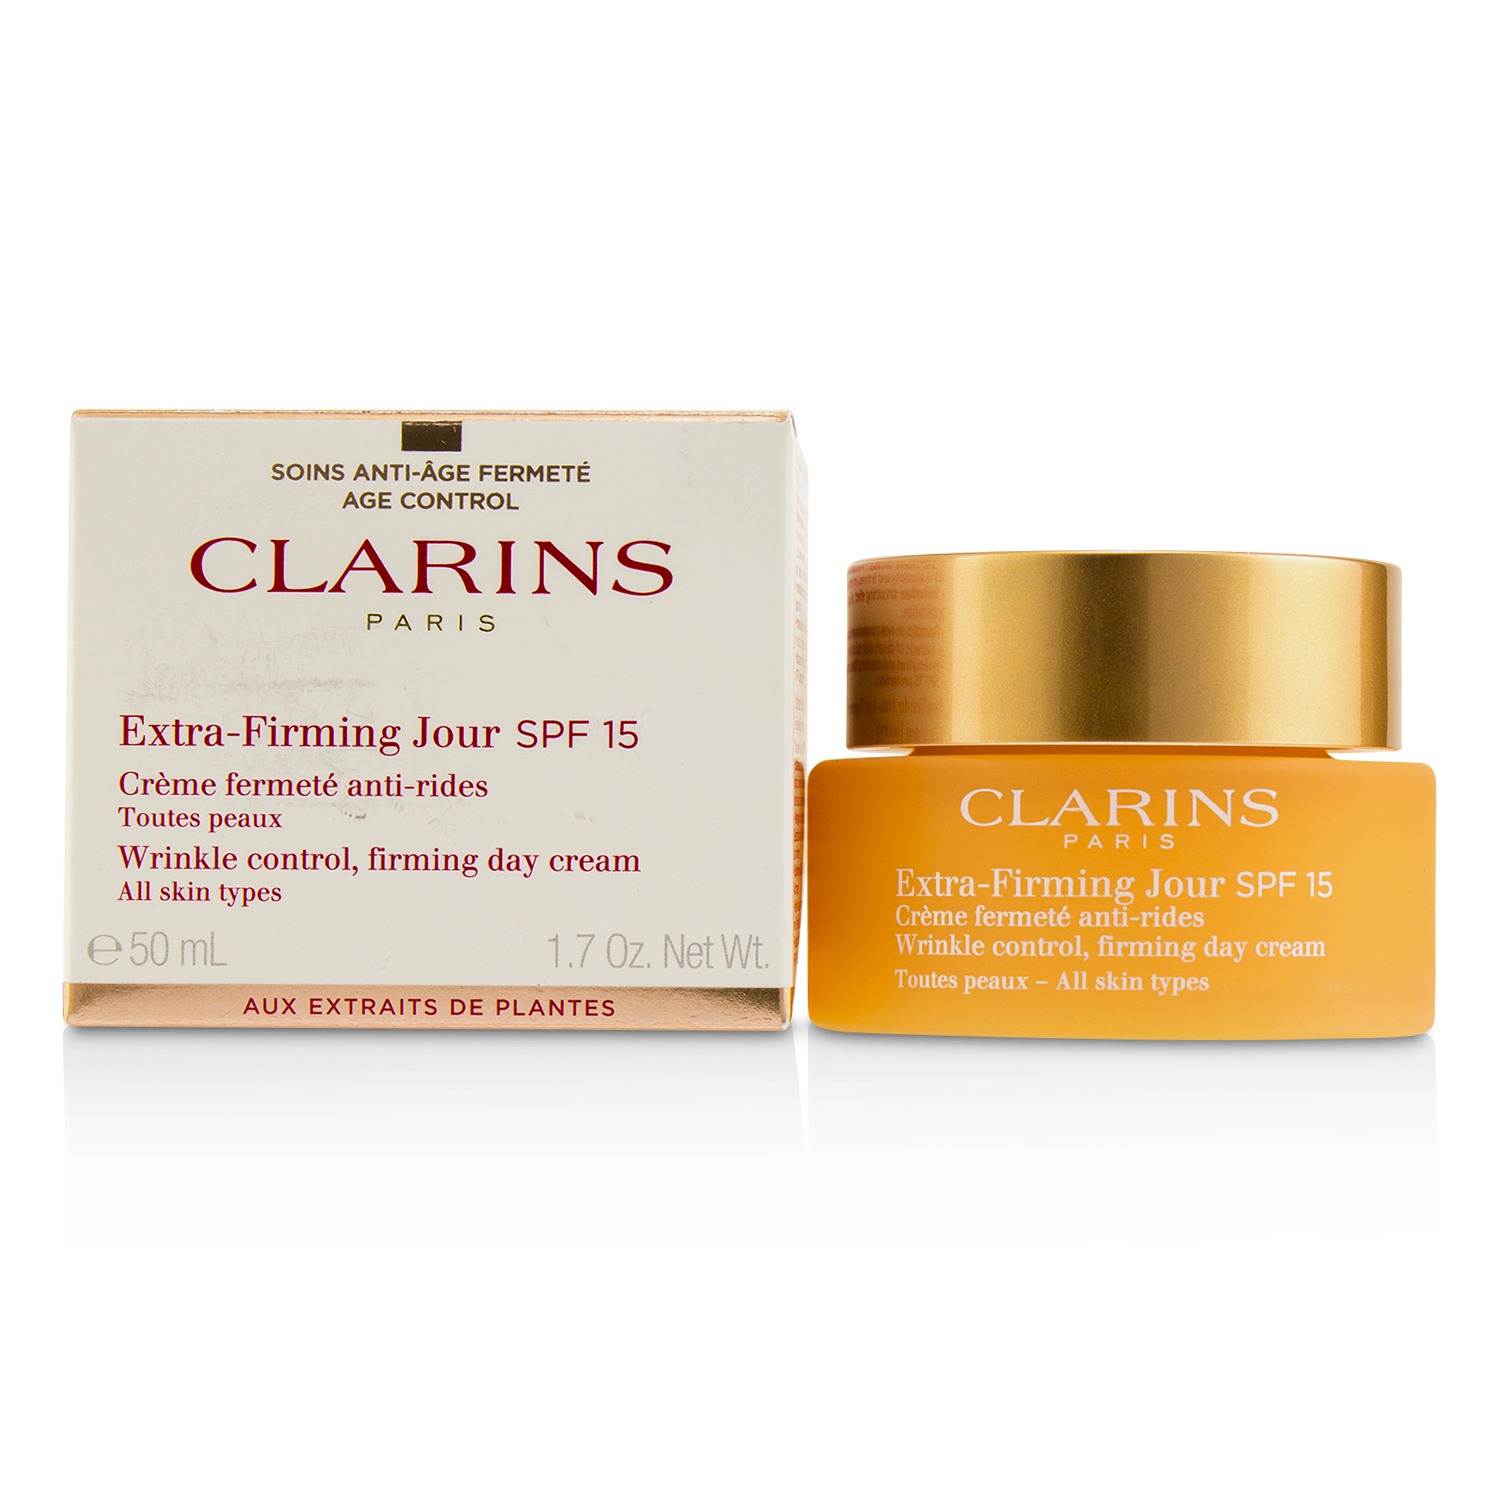 Extra-Firming Jour Wrinkle Control Firming Day Cream SPF 15 - All Skin Types Clarins Image